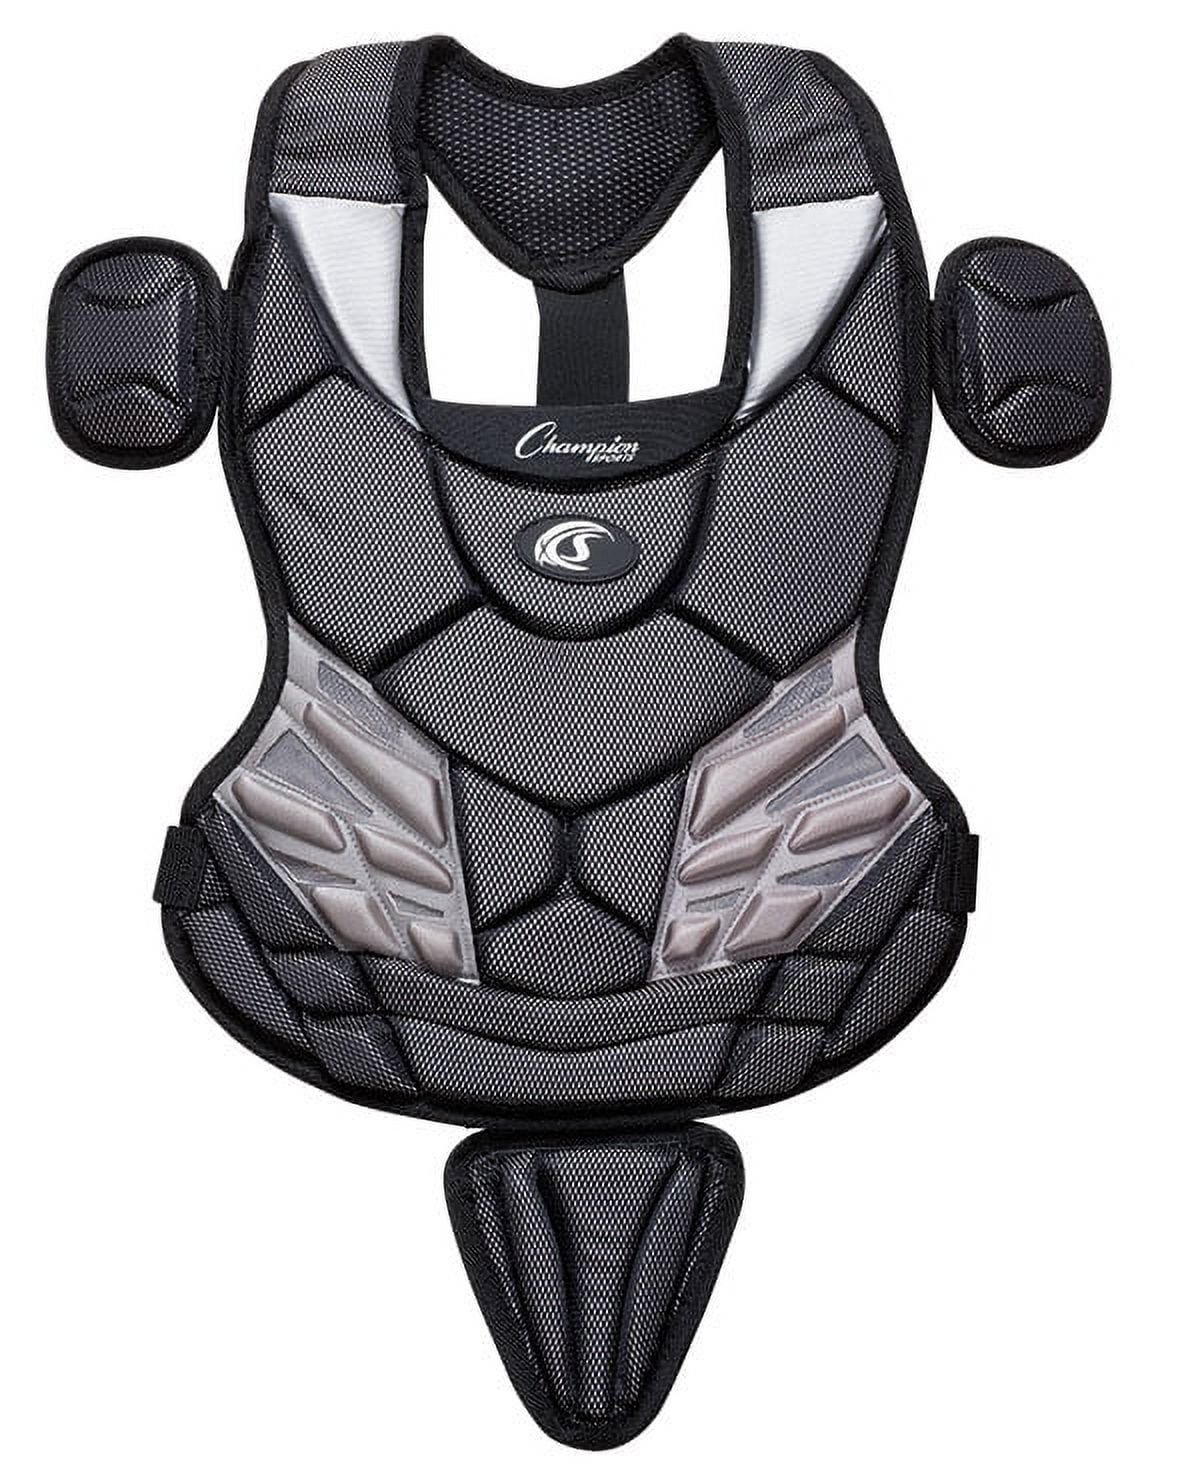 Picture of Champion Sports 03641 Little League Chest Protector with Tail, Black